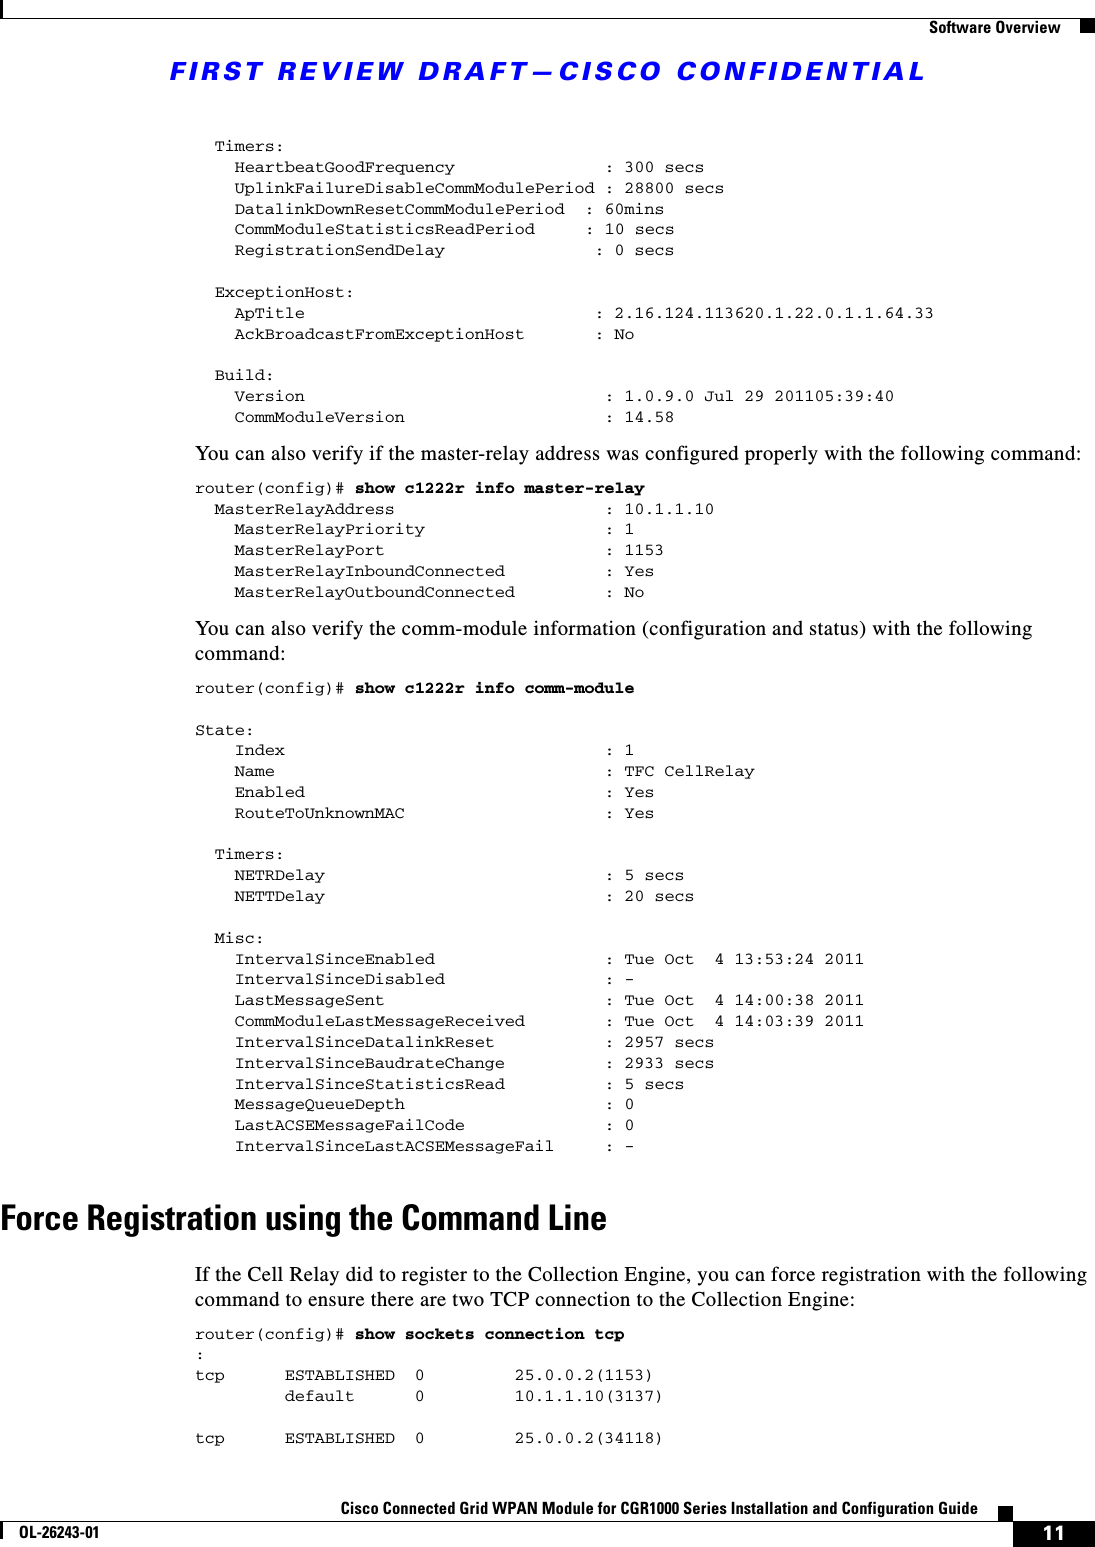 FIRST REVIEW DRAFT—CISCO CONFIDENTIAL11Cisco Connected Grid WPAN Module for CGR1000 Series Installation and Configuration GuideOL-26243-01  Software Overview  Timers:    HeartbeatGoodFrequency               : 300 secs    UplinkFailureDisableCommModulePeriod : 28800 secs    DatalinkDownResetCommModulePeriod  : 60mins    CommModuleStatisticsReadPeriod     : 10 secs    RegistrationSendDelay               : 0 secs  ExceptionHost:    ApTitle                             : 2.16.124.113620.1.22.0.1.1.64.33    AckBroadcastFromExceptionHost       : No  Build:    Version                              : 1.0.9.0 Jul 29 201105:39:40    CommModuleVersion                    : 14.58You can also verify if the master-relay address was configured properly with the following command:router(config)# show c1222r info master-relay   MasterRelayAddress                     : 10.1.1.10    MasterRelayPriority                  : 1    MasterRelayPort                      : 1153    MasterRelayInboundConnected          : Yes    MasterRelayOutboundConnected         : NoYou can also verify the comm-module information (configuration and status) with the following command:router(config)# show c1222r info comm-moduleState:    Index                                : 1    Name                                 : TFC CellRelay    Enabled                              : Yes    RouteToUnknownMAC                    : Yes  Timers:    NETRDelay                            : 5 secs    NETTDelay                            : 20 secs  Misc:    IntervalSinceEnabled                 : Tue Oct  4 13:53:24 2011    IntervalSinceDisabled                : -    LastMessageSent                      : Tue Oct  4 14:00:38 2011    CommModuleLastMessageReceived        : Tue Oct  4 14:03:39 2011    IntervalSinceDatalinkReset           : 2957 secs    IntervalSinceBaudrateChange          : 2933 secs    IntervalSinceStatisticsRead          : 5 secs    MessageQueueDepth                    : 0    LastACSEMessageFailCode              : 0    IntervalSinceLastACSEMessageFail     : -Force Registration using the Command LineIf the Cell Relay did to register to the Collection Engine, you can force registration with the following command to ensure there are two TCP connection to the Collection Engine:router(config)# show sockets connection tcp:tcp      ESTABLISHED  0         25.0.0.2(1153)         default      0         10.1.1.10(3137) tcp      ESTABLISHED  0         25.0.0.2(34118)